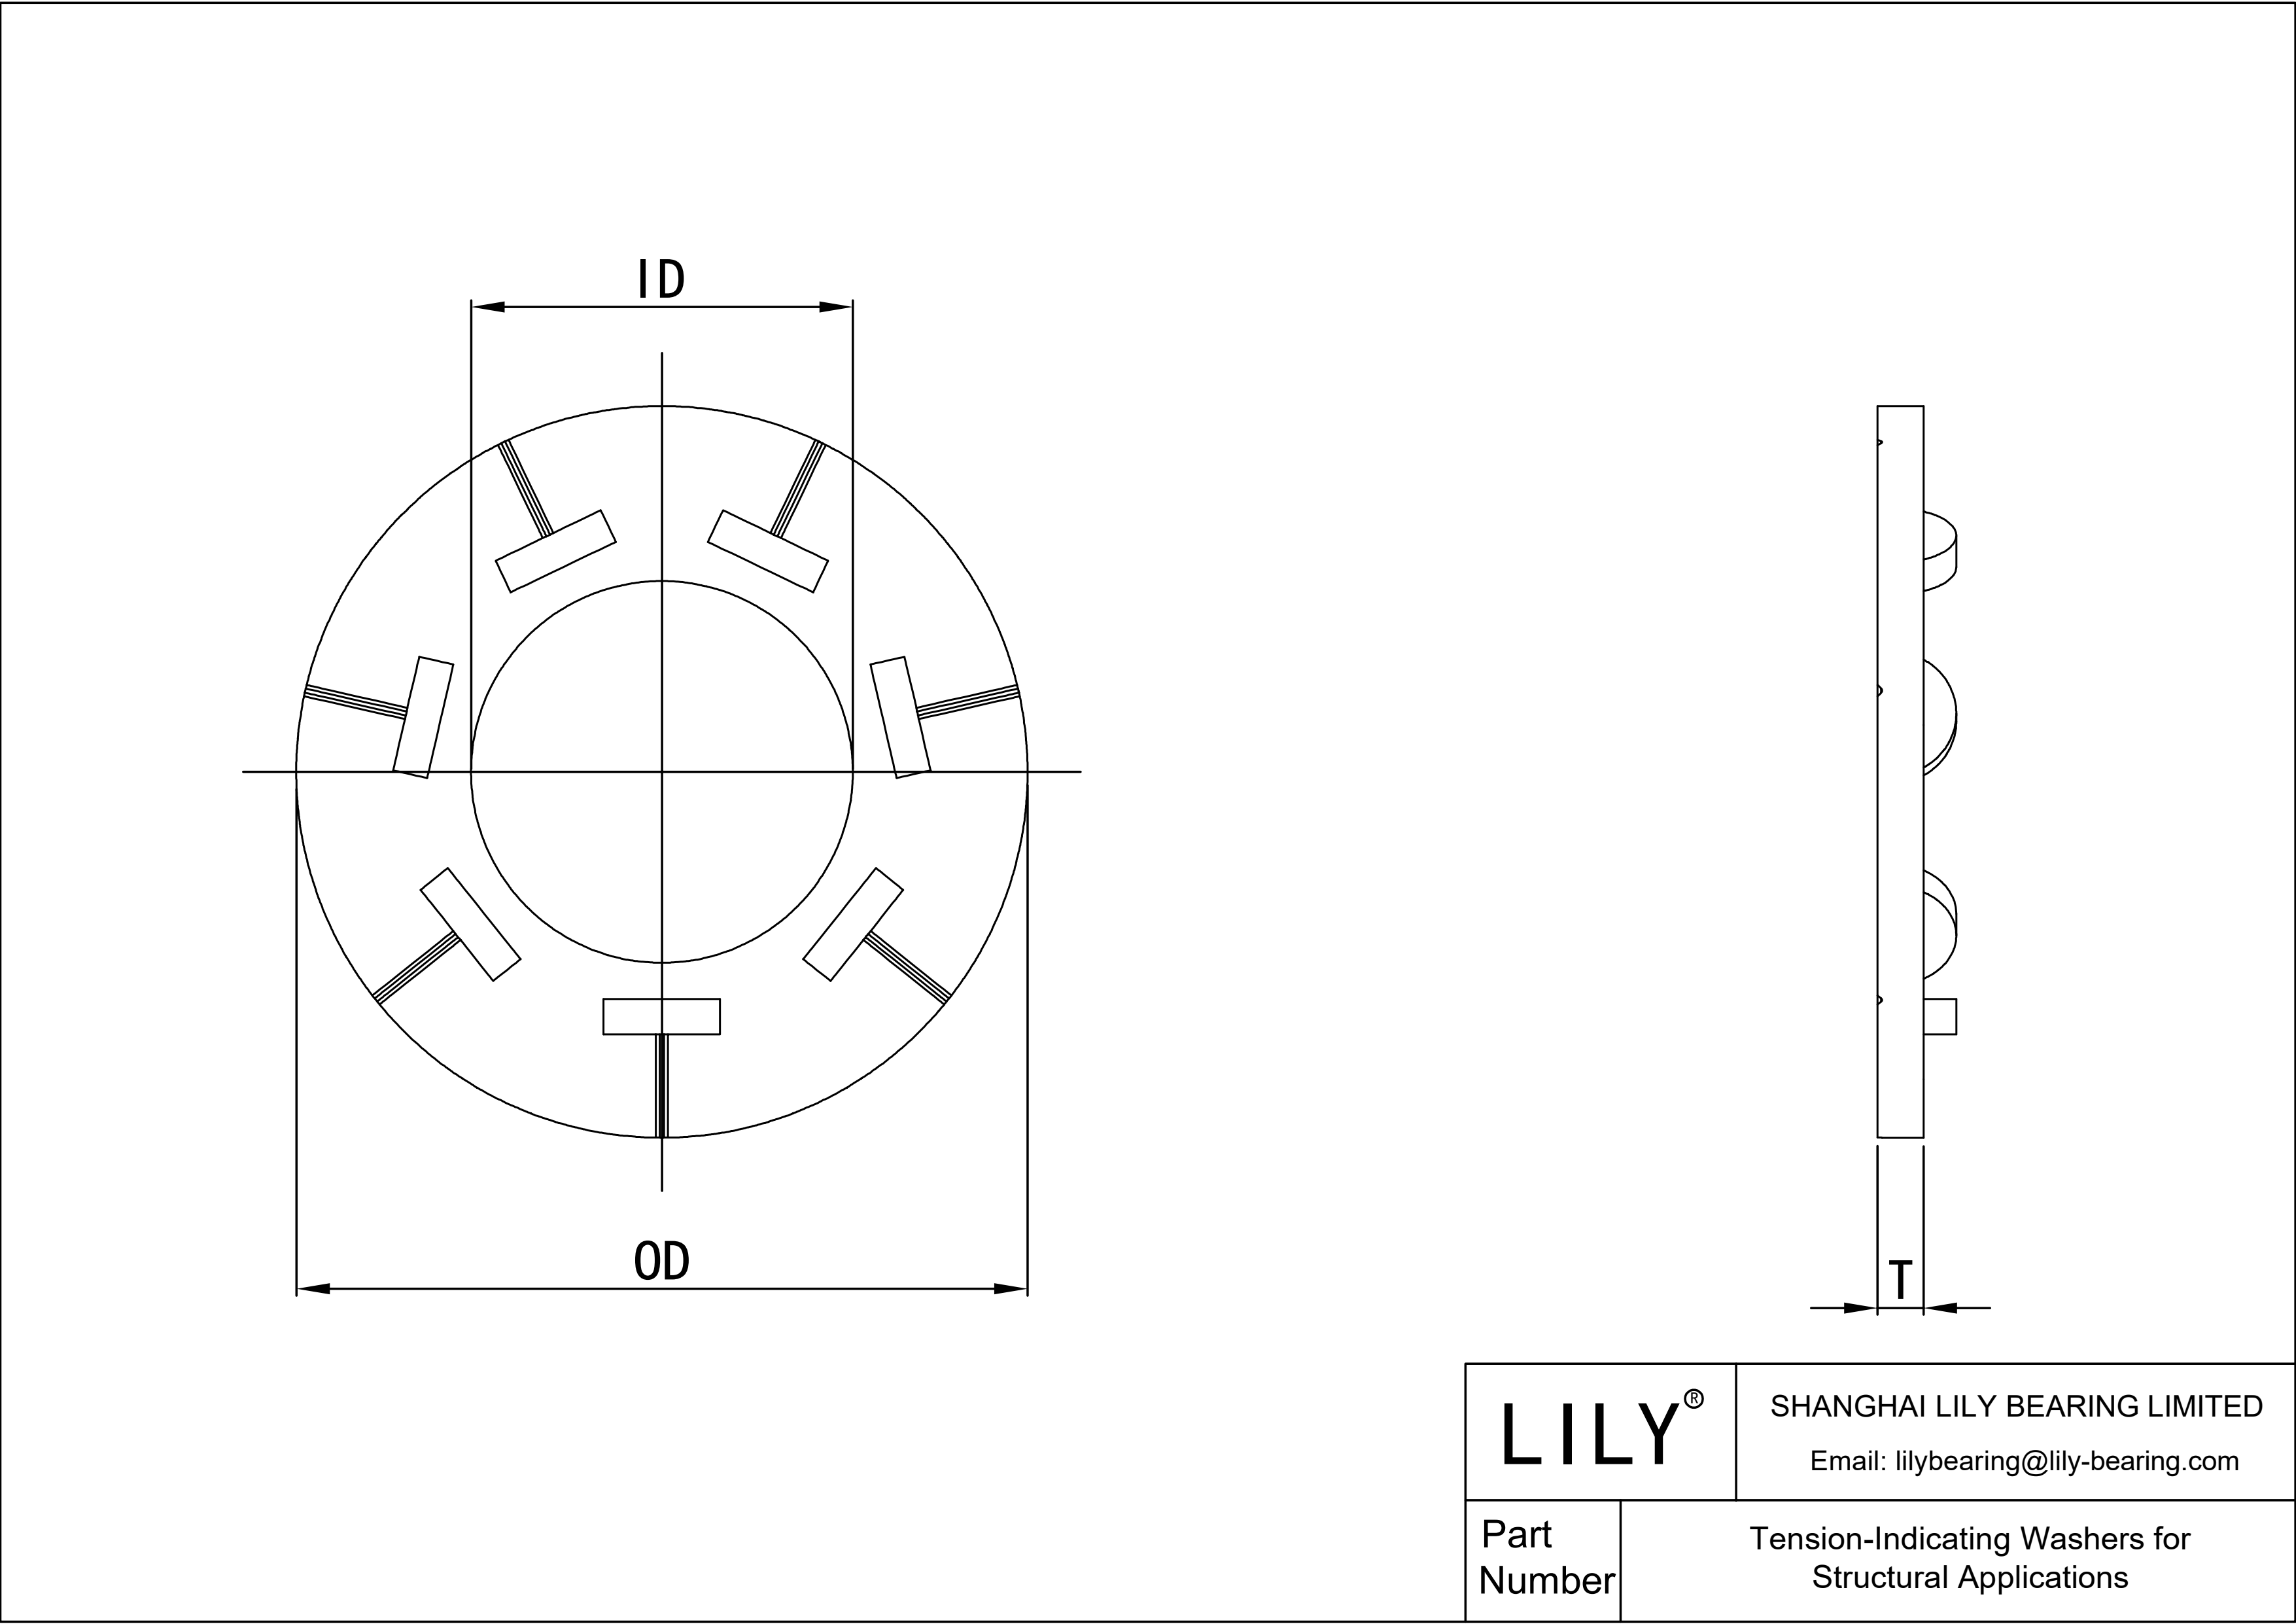 JFDBIABCE Tension-Indicating Washers for Structural Applications cad drawing